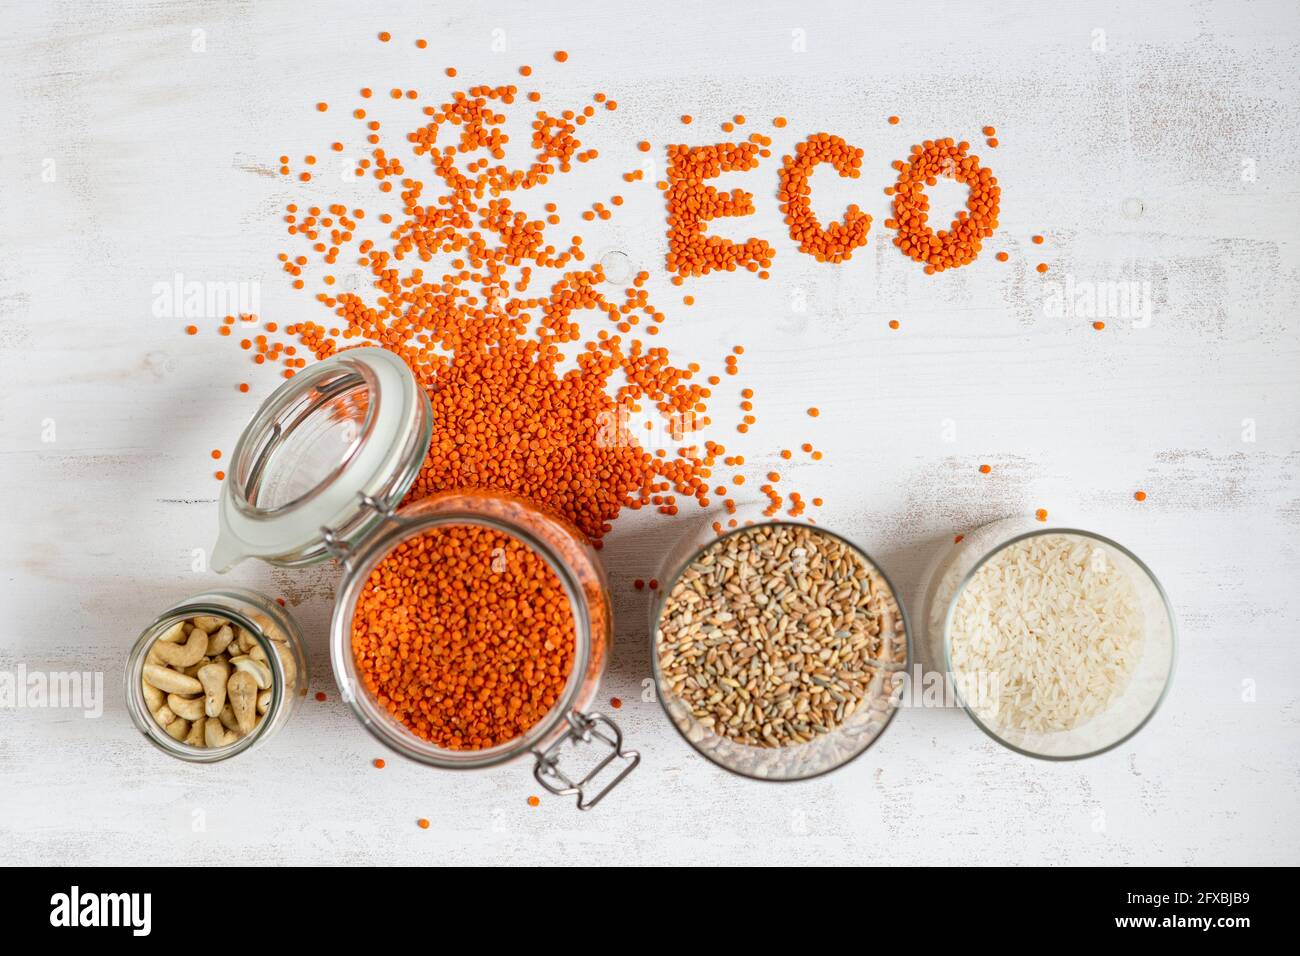 Variation of dried food jar by Eco text on textured background Stock Photo